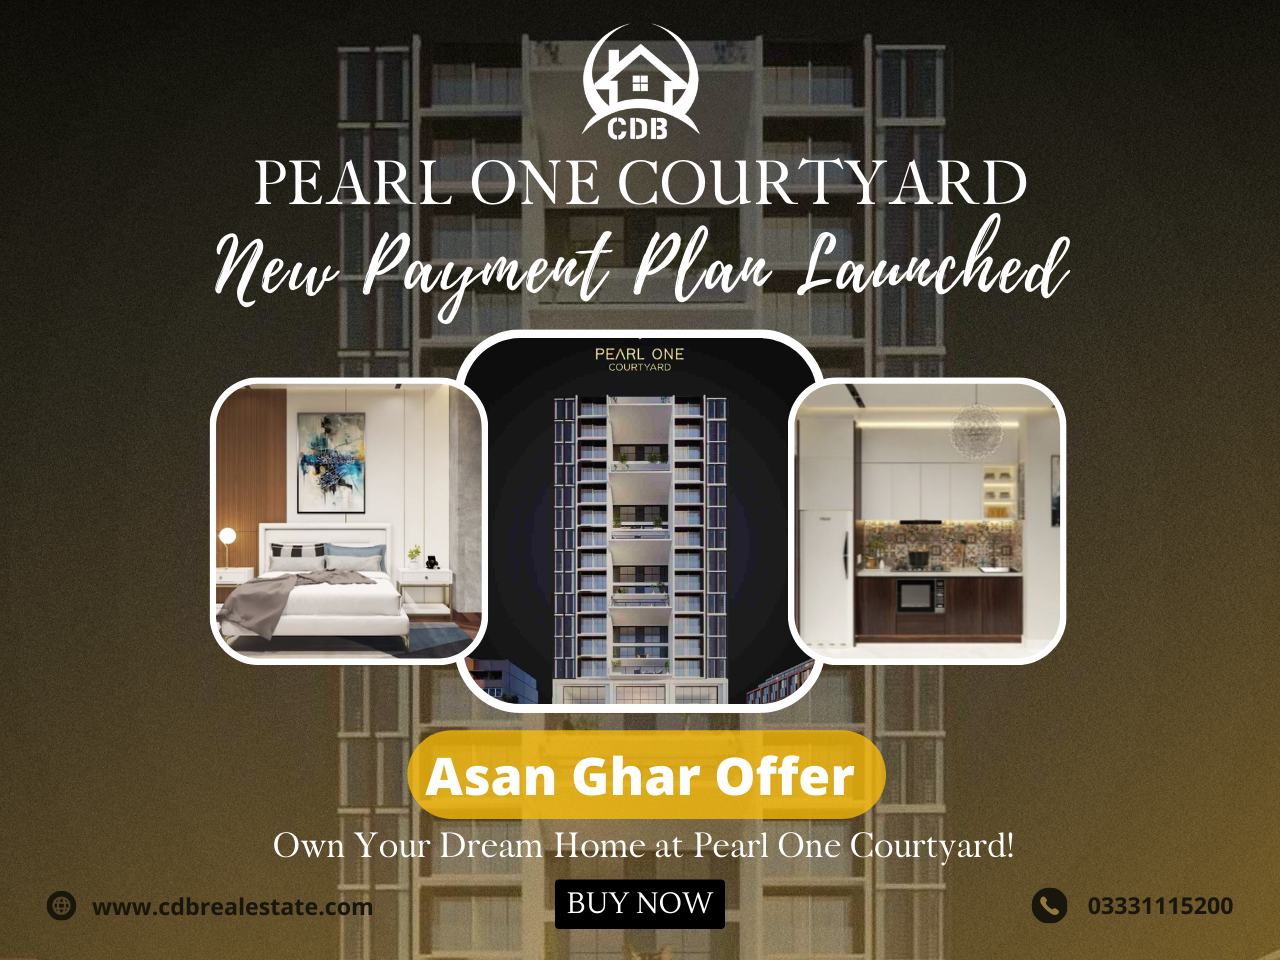 Pearl One Courtyard New Payment Plan